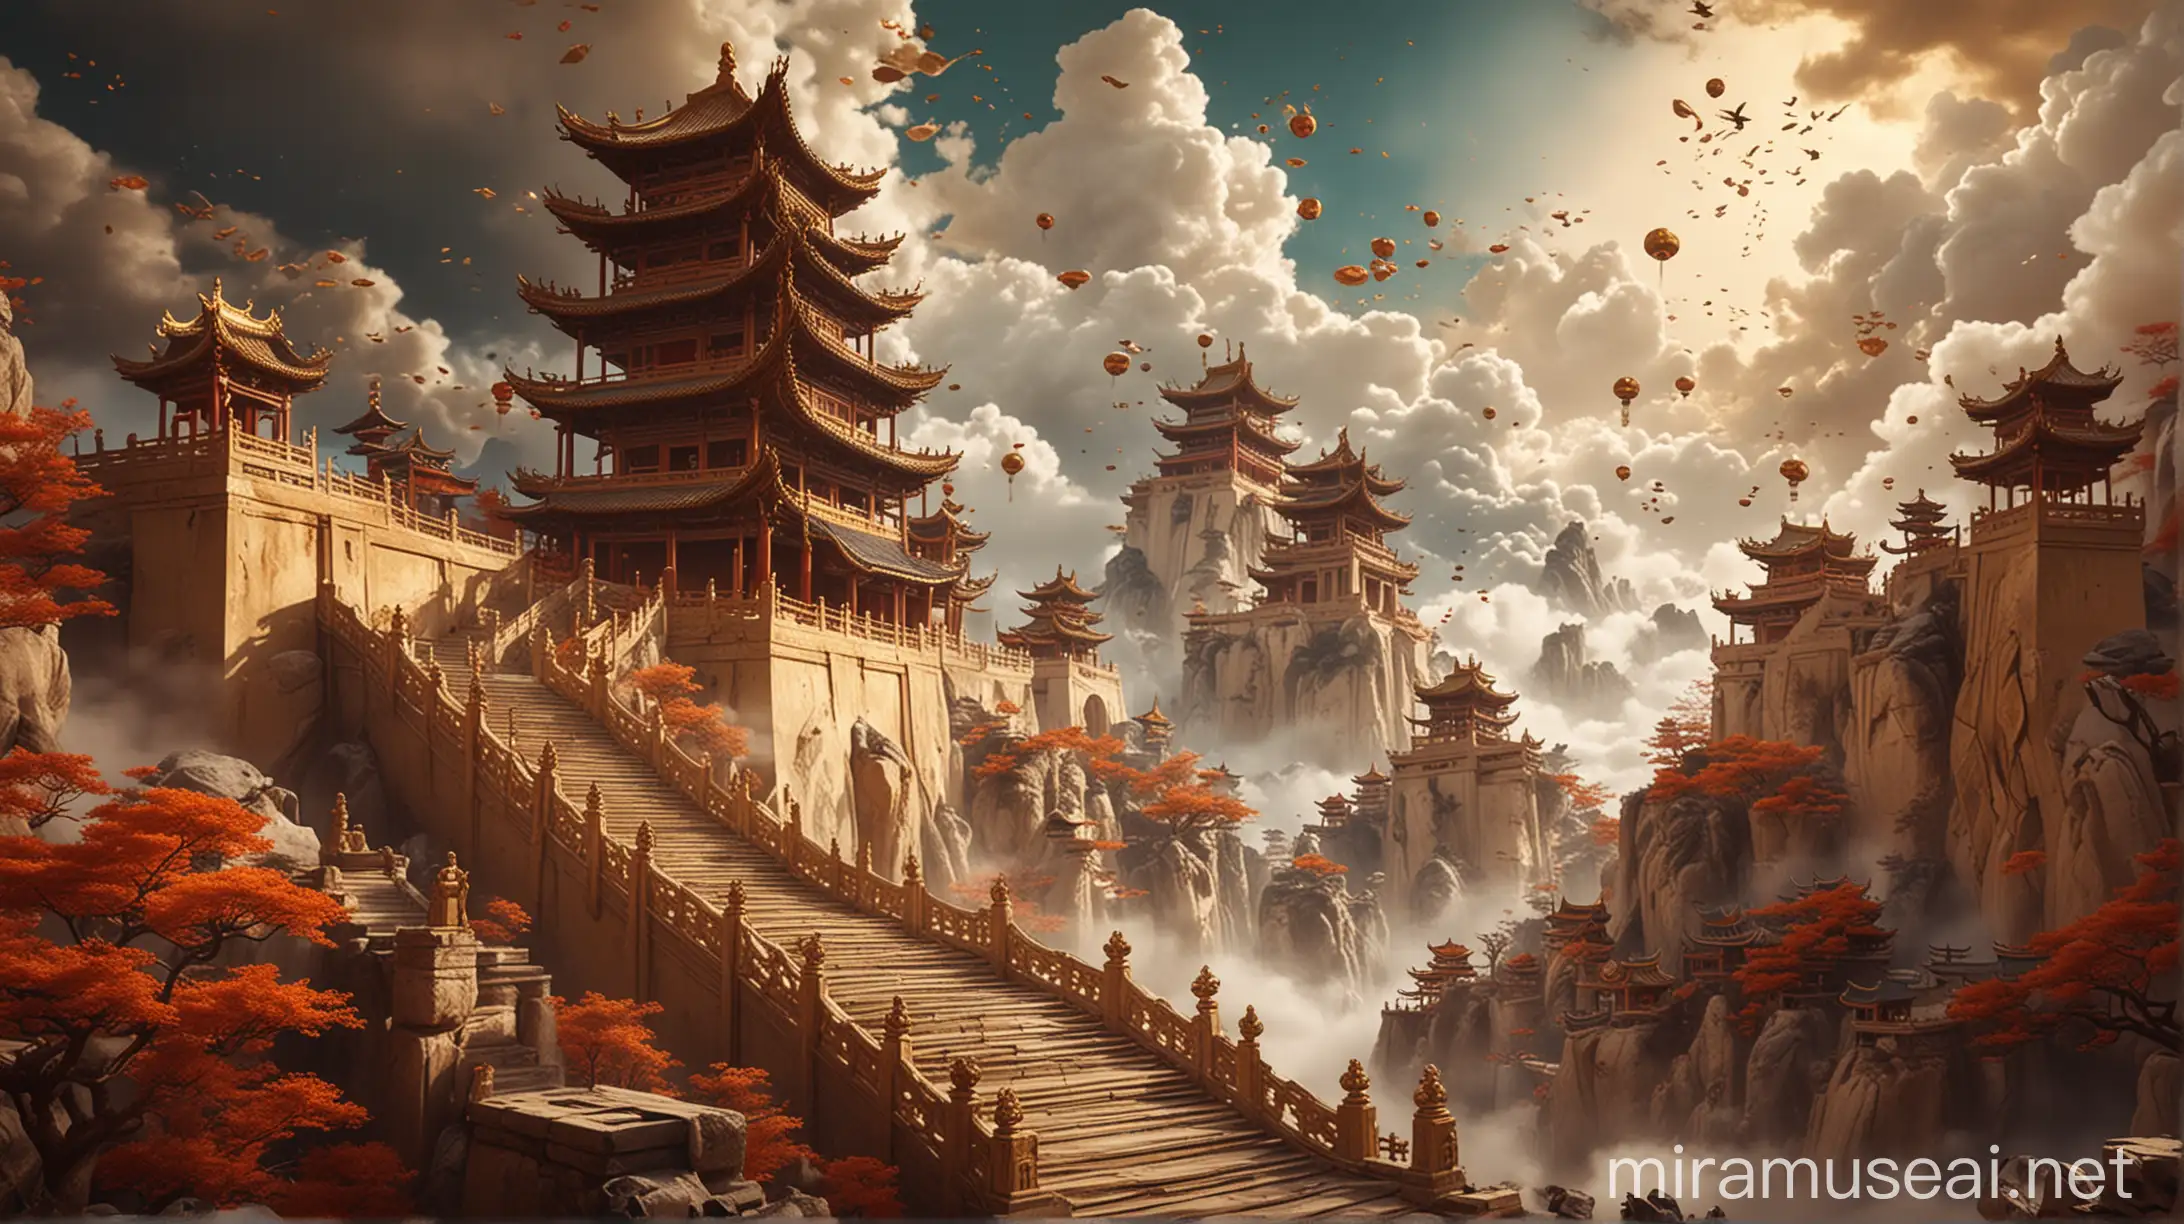 ... A Chinese-style landscape painting, consisting of ancient scrolls and long staircases, floating in the air and surrounded by auspicious clouds. The scene is rendered with C4D OC renderer, with high resolution, vivid colors, and a surreal fantasy effect. It features a golden color scheme with exquisite details, including figures such as figures in traditional architecture and traditional Chinese painting styles